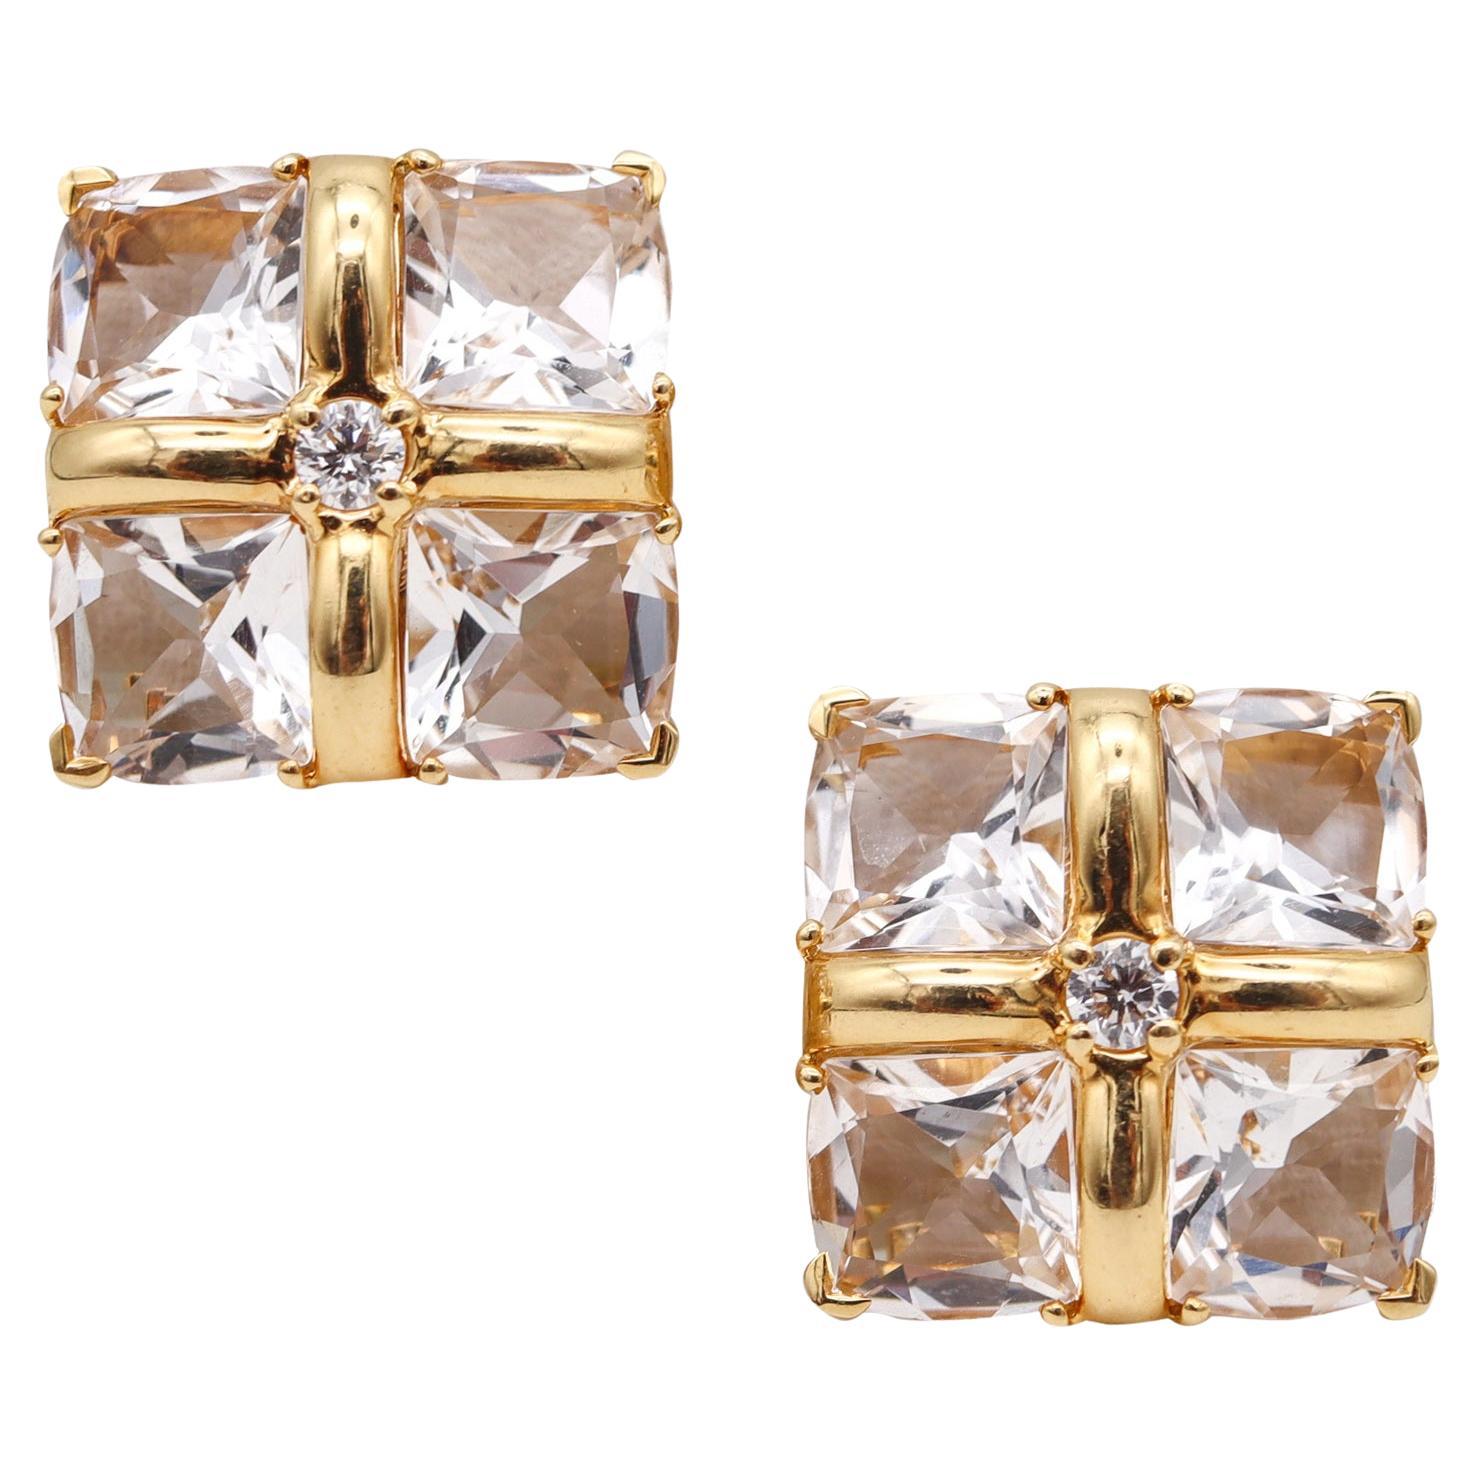 Seaman Schepps Squared Clips Earrings 18Kt Gold With 24.20 Cts Diamonds & Quartz